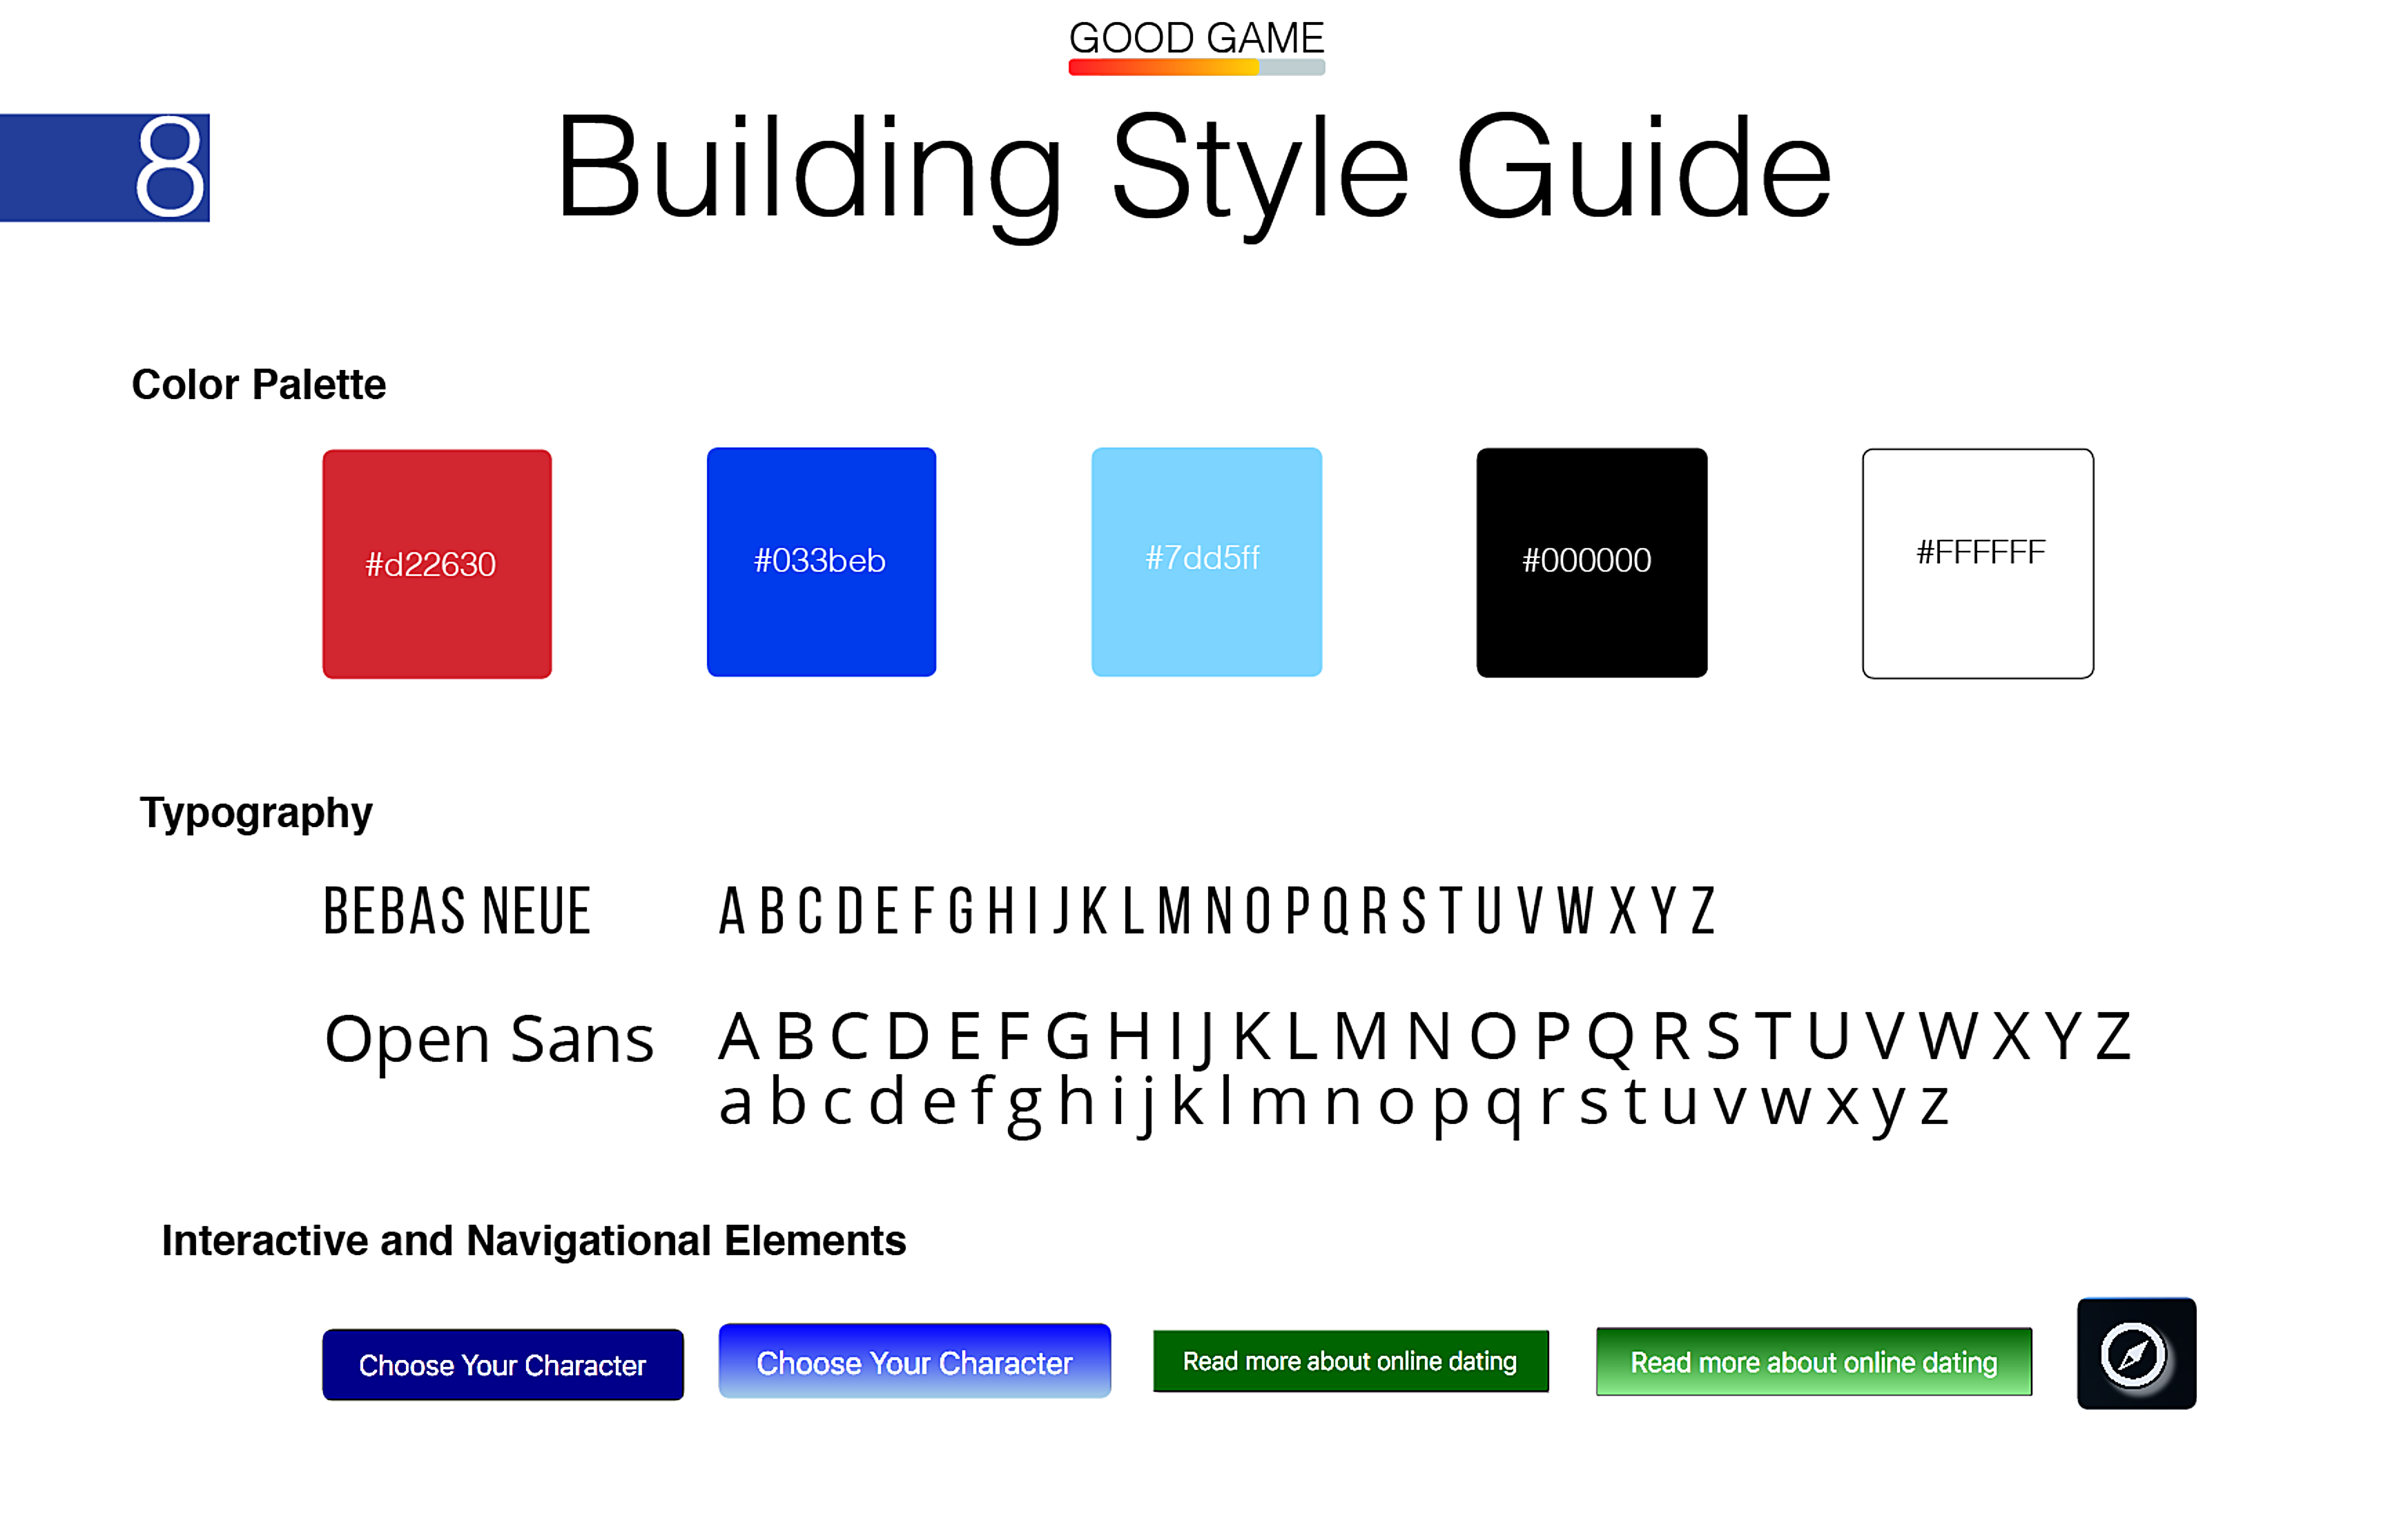 building a style guide to ensure design consistency, especially in layouts, typography, interaction design, and other graphical elements